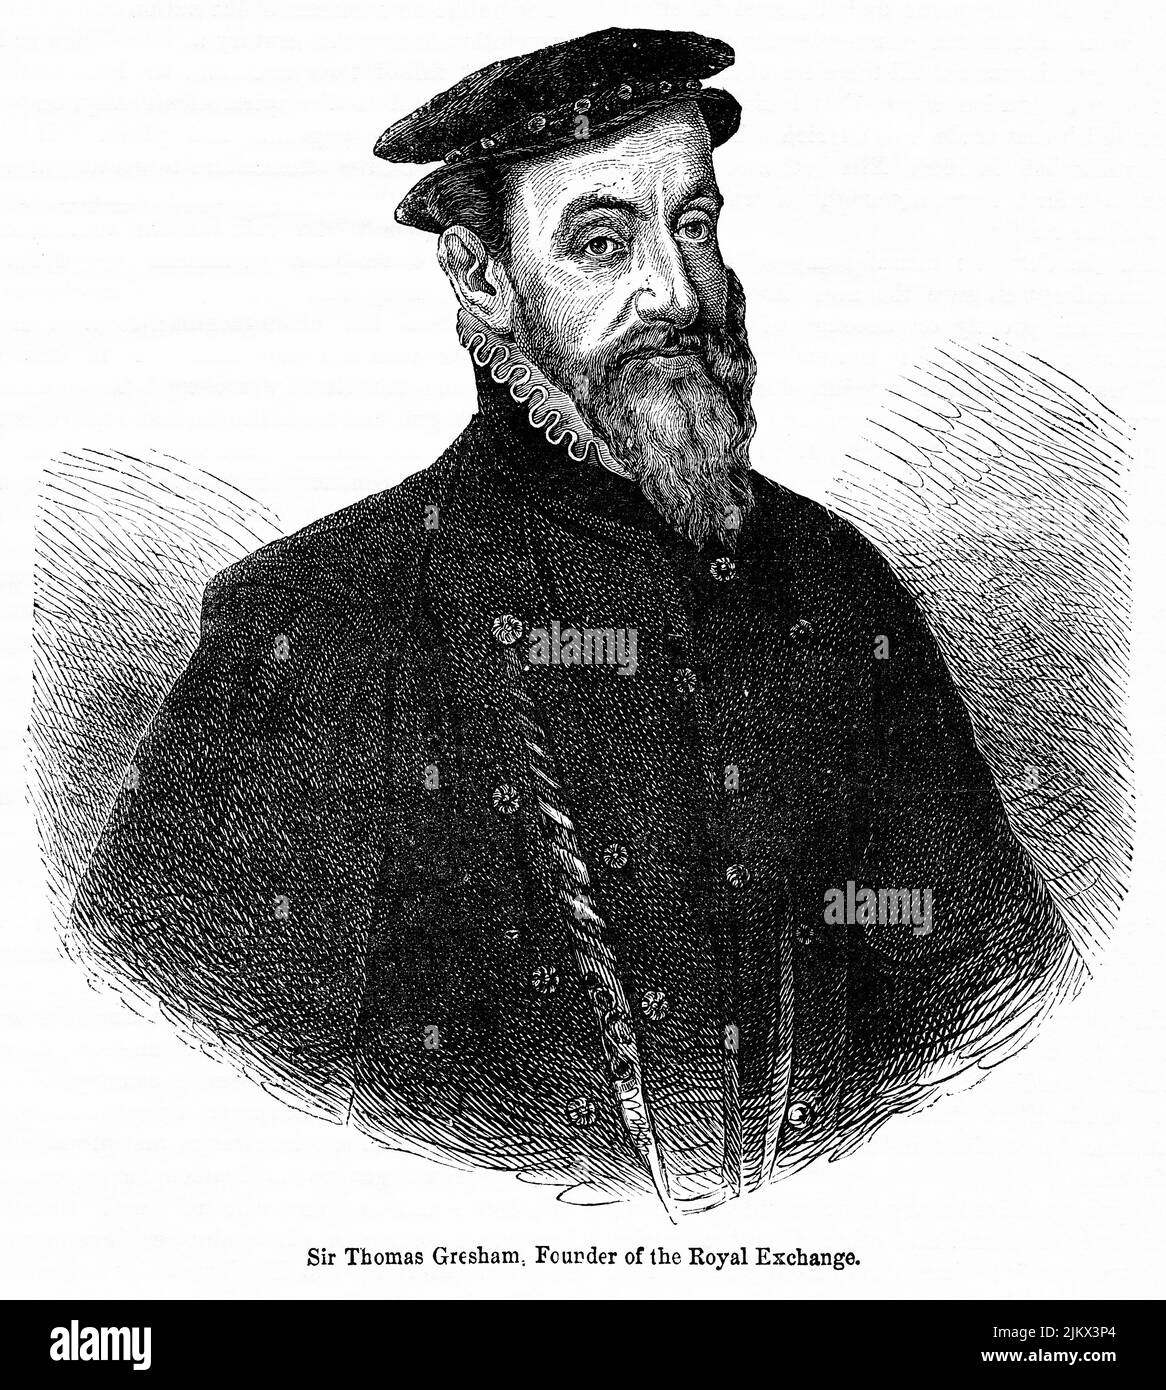 Sir Thomas Gresham, Founder of the Royal Exchange, Illustration from the Book, 'John Cassel’s Illustrated History of England, Volume II', text by William Howitt, Cassell, Petter, and Galpin, London, 1858 Stock Photo